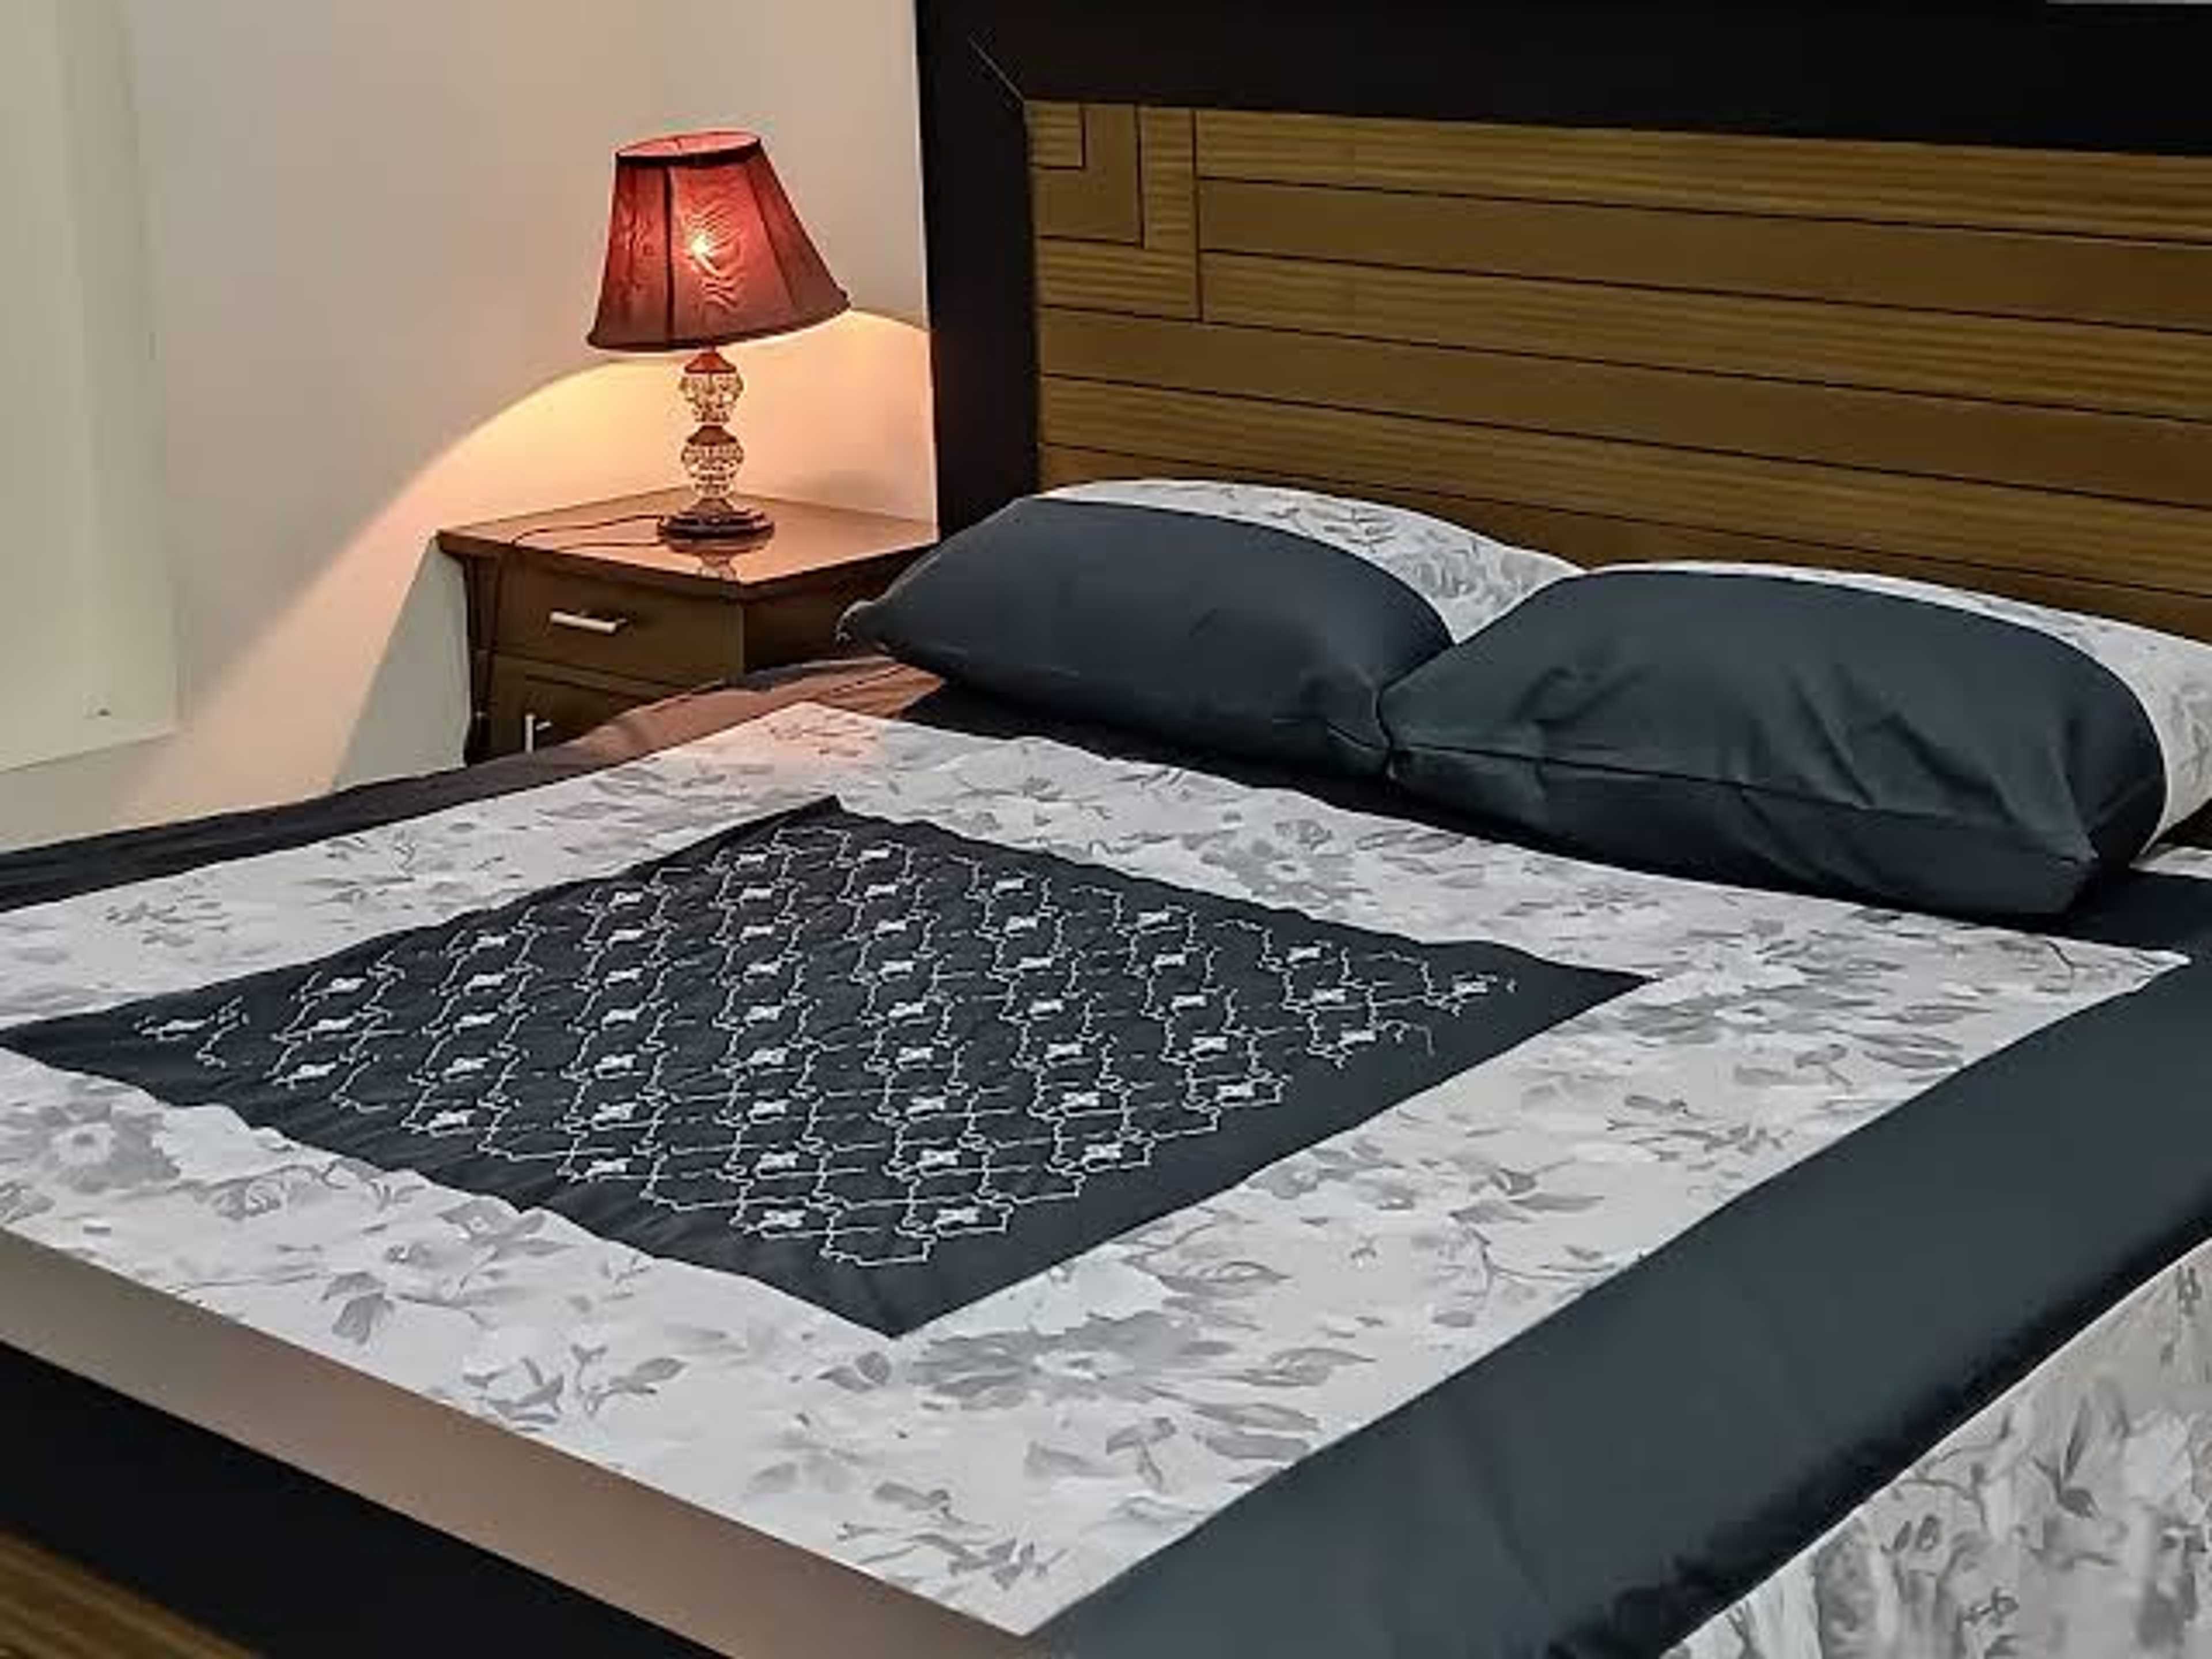 Cotton patch work bedsheets